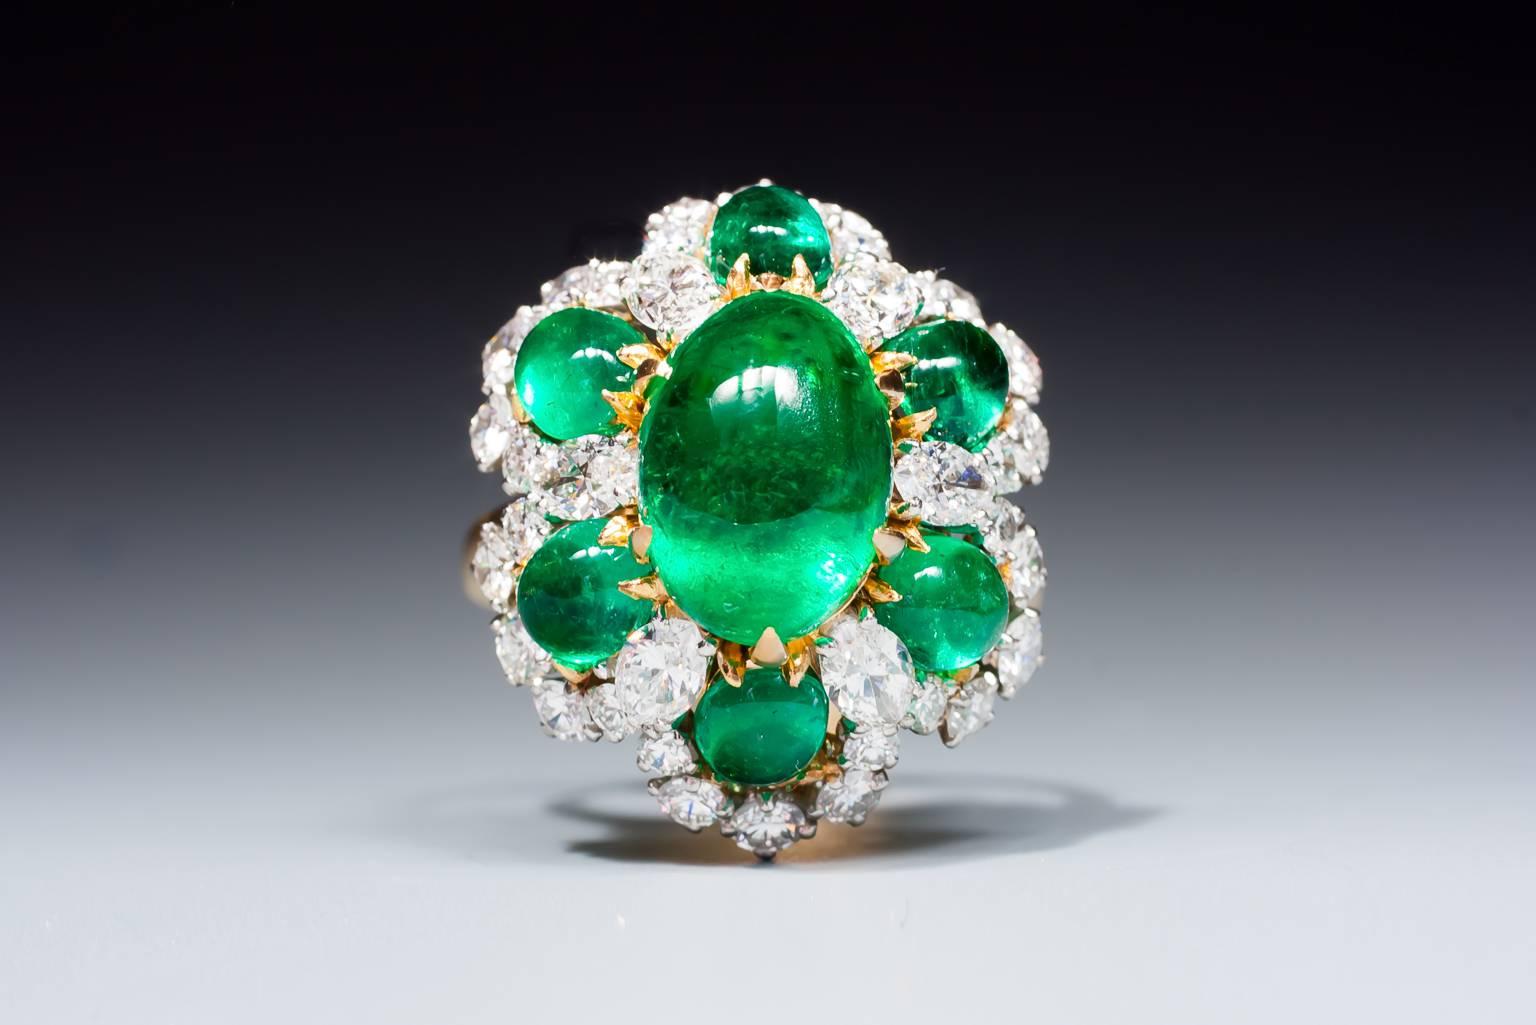 A very fine Colombian emerald and diamond ring, set with a magnificent large emerald cabochon, surrounded by smaller emerald cabochons and marquise shaped diamonds, in a brilliant cut diamond surround, mounted in 18 karat yellow gold. The emeralds